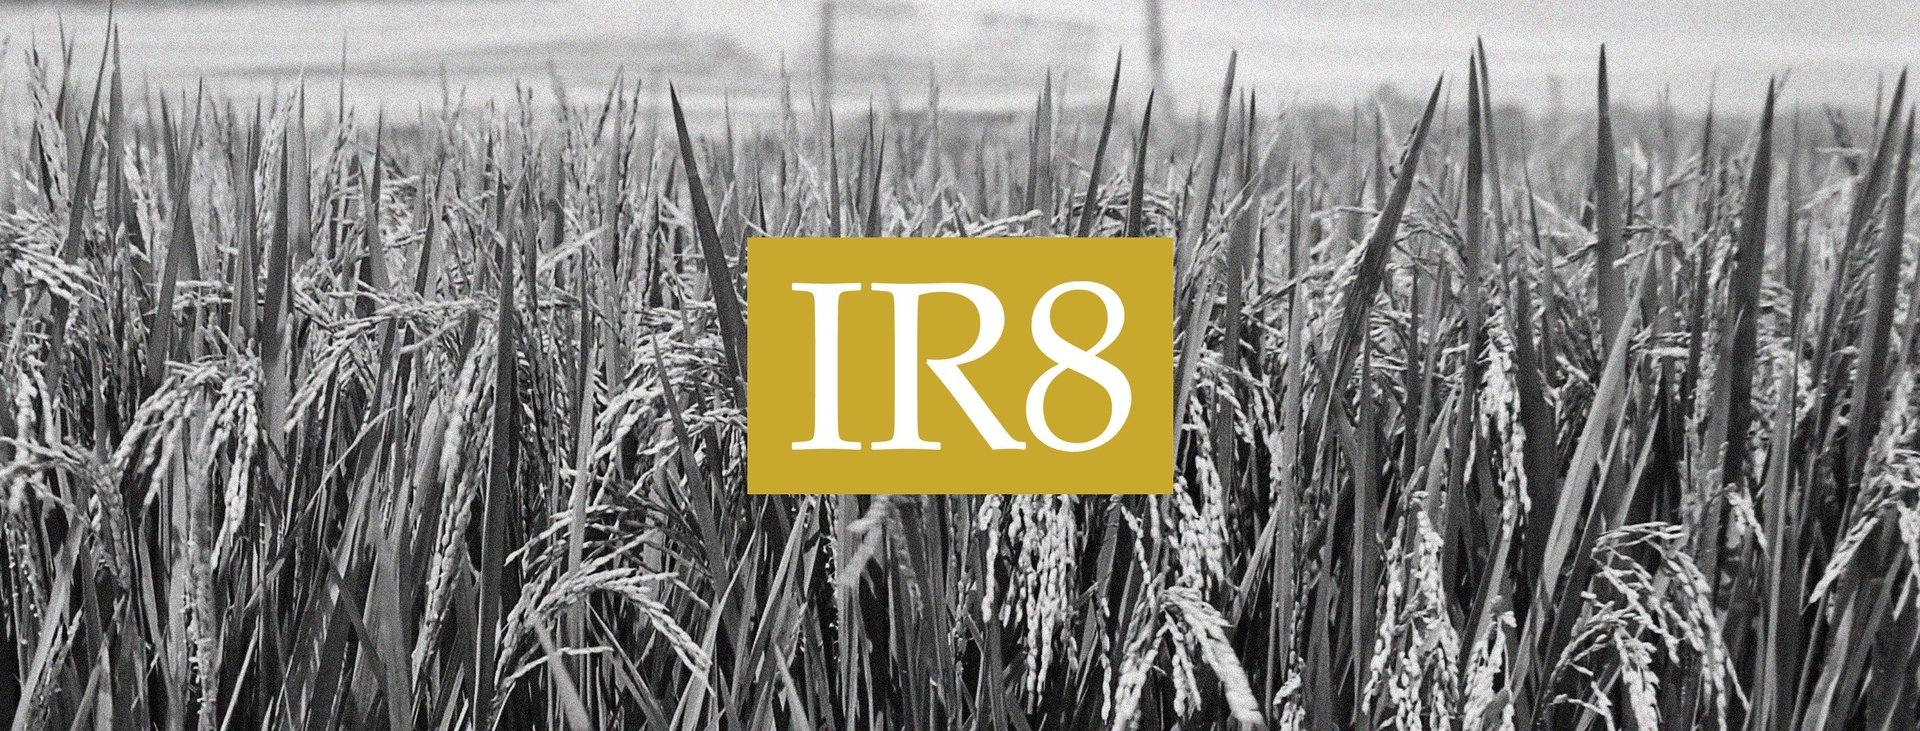 IR8 was the fruit of combined efforts of three renowned scientist: Dr. T.T. Chang, Dr. Peter Jenning, and H.M. Beachell. Photo: The Better in India.